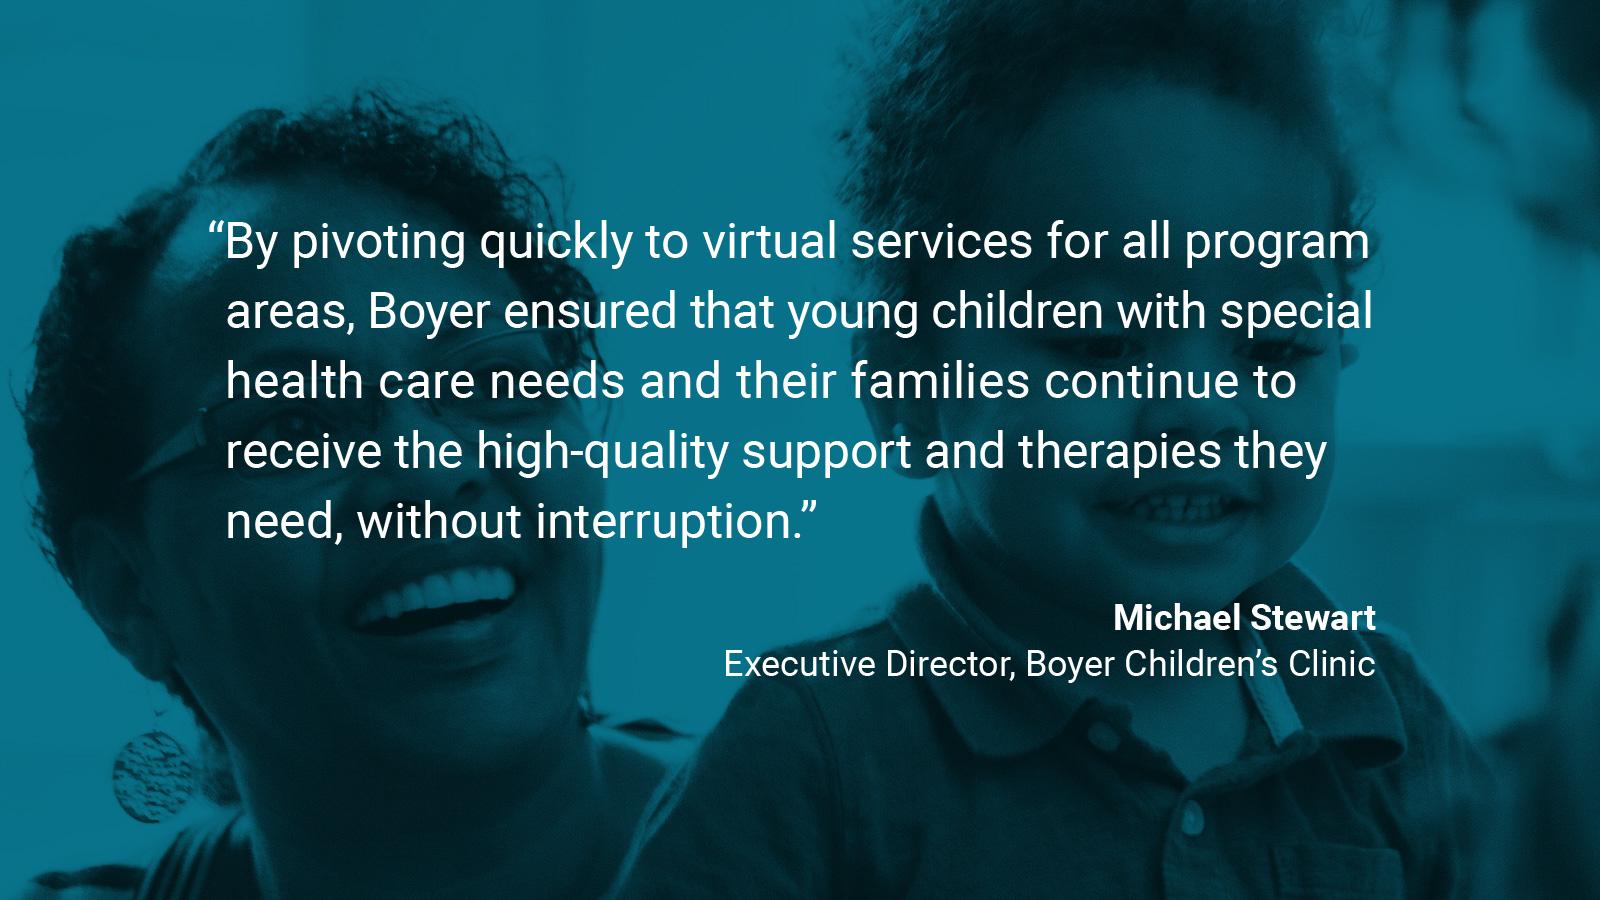 (slide 1 of 4) Quote by: Michael Stewart, Executive Director of Boyer Children's Clinic:  “By pivoting quickly to virtual services for all program areas, Boyer ensured that young children with special healthcare needs and their families continue to receive the high-quality support and therapies they need, without interruption.” . 